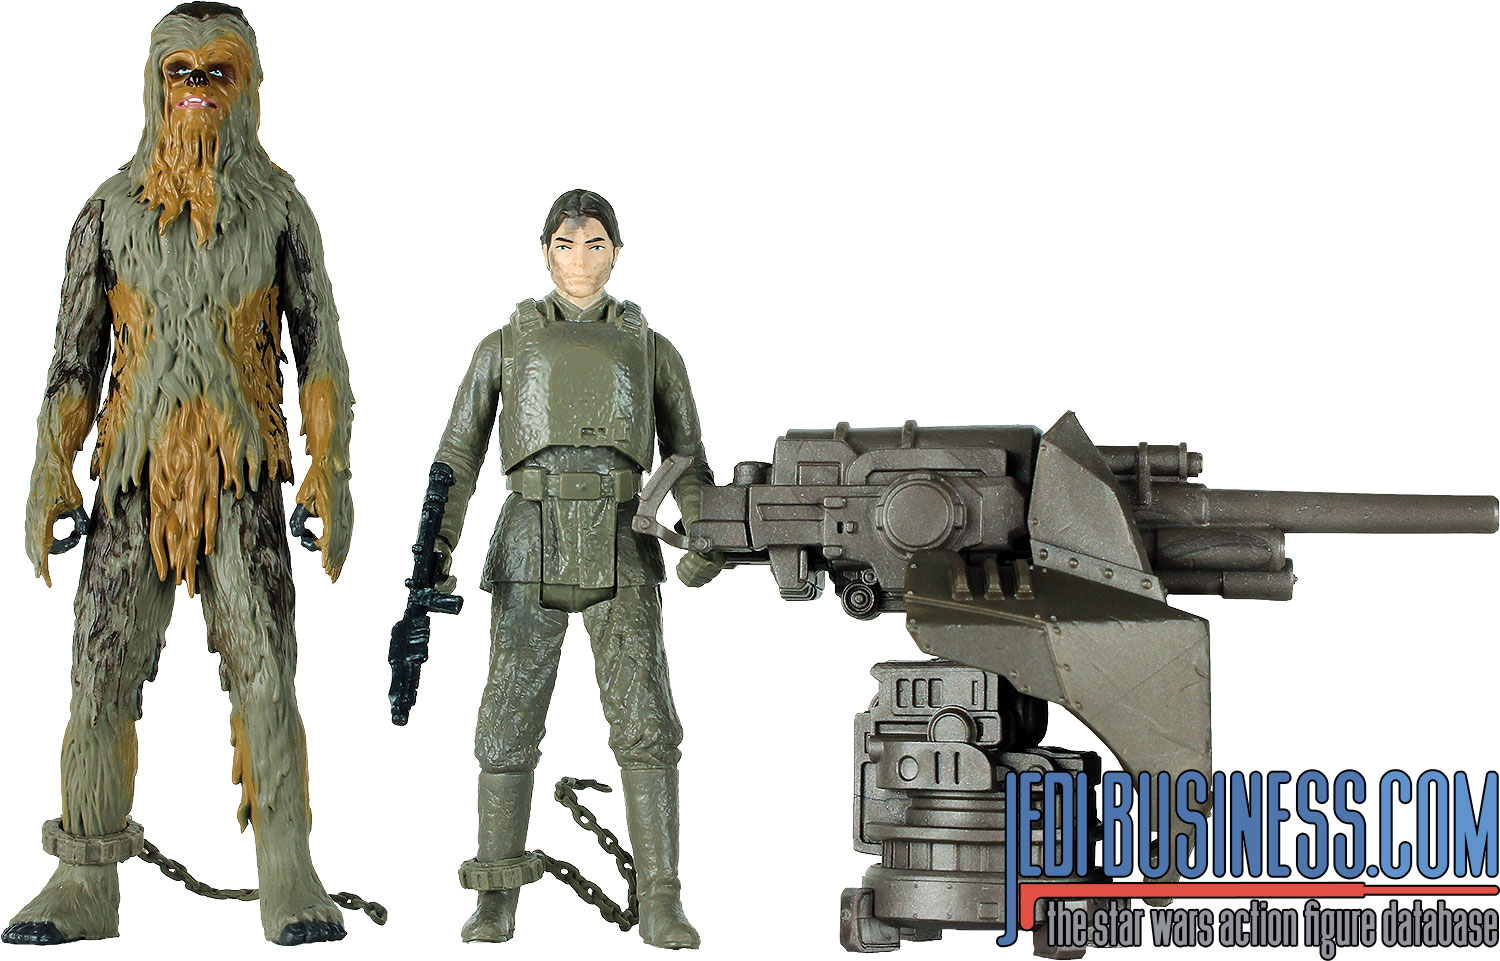 Chewbacca 2-Pack #4 With Han Solo (Mimban)